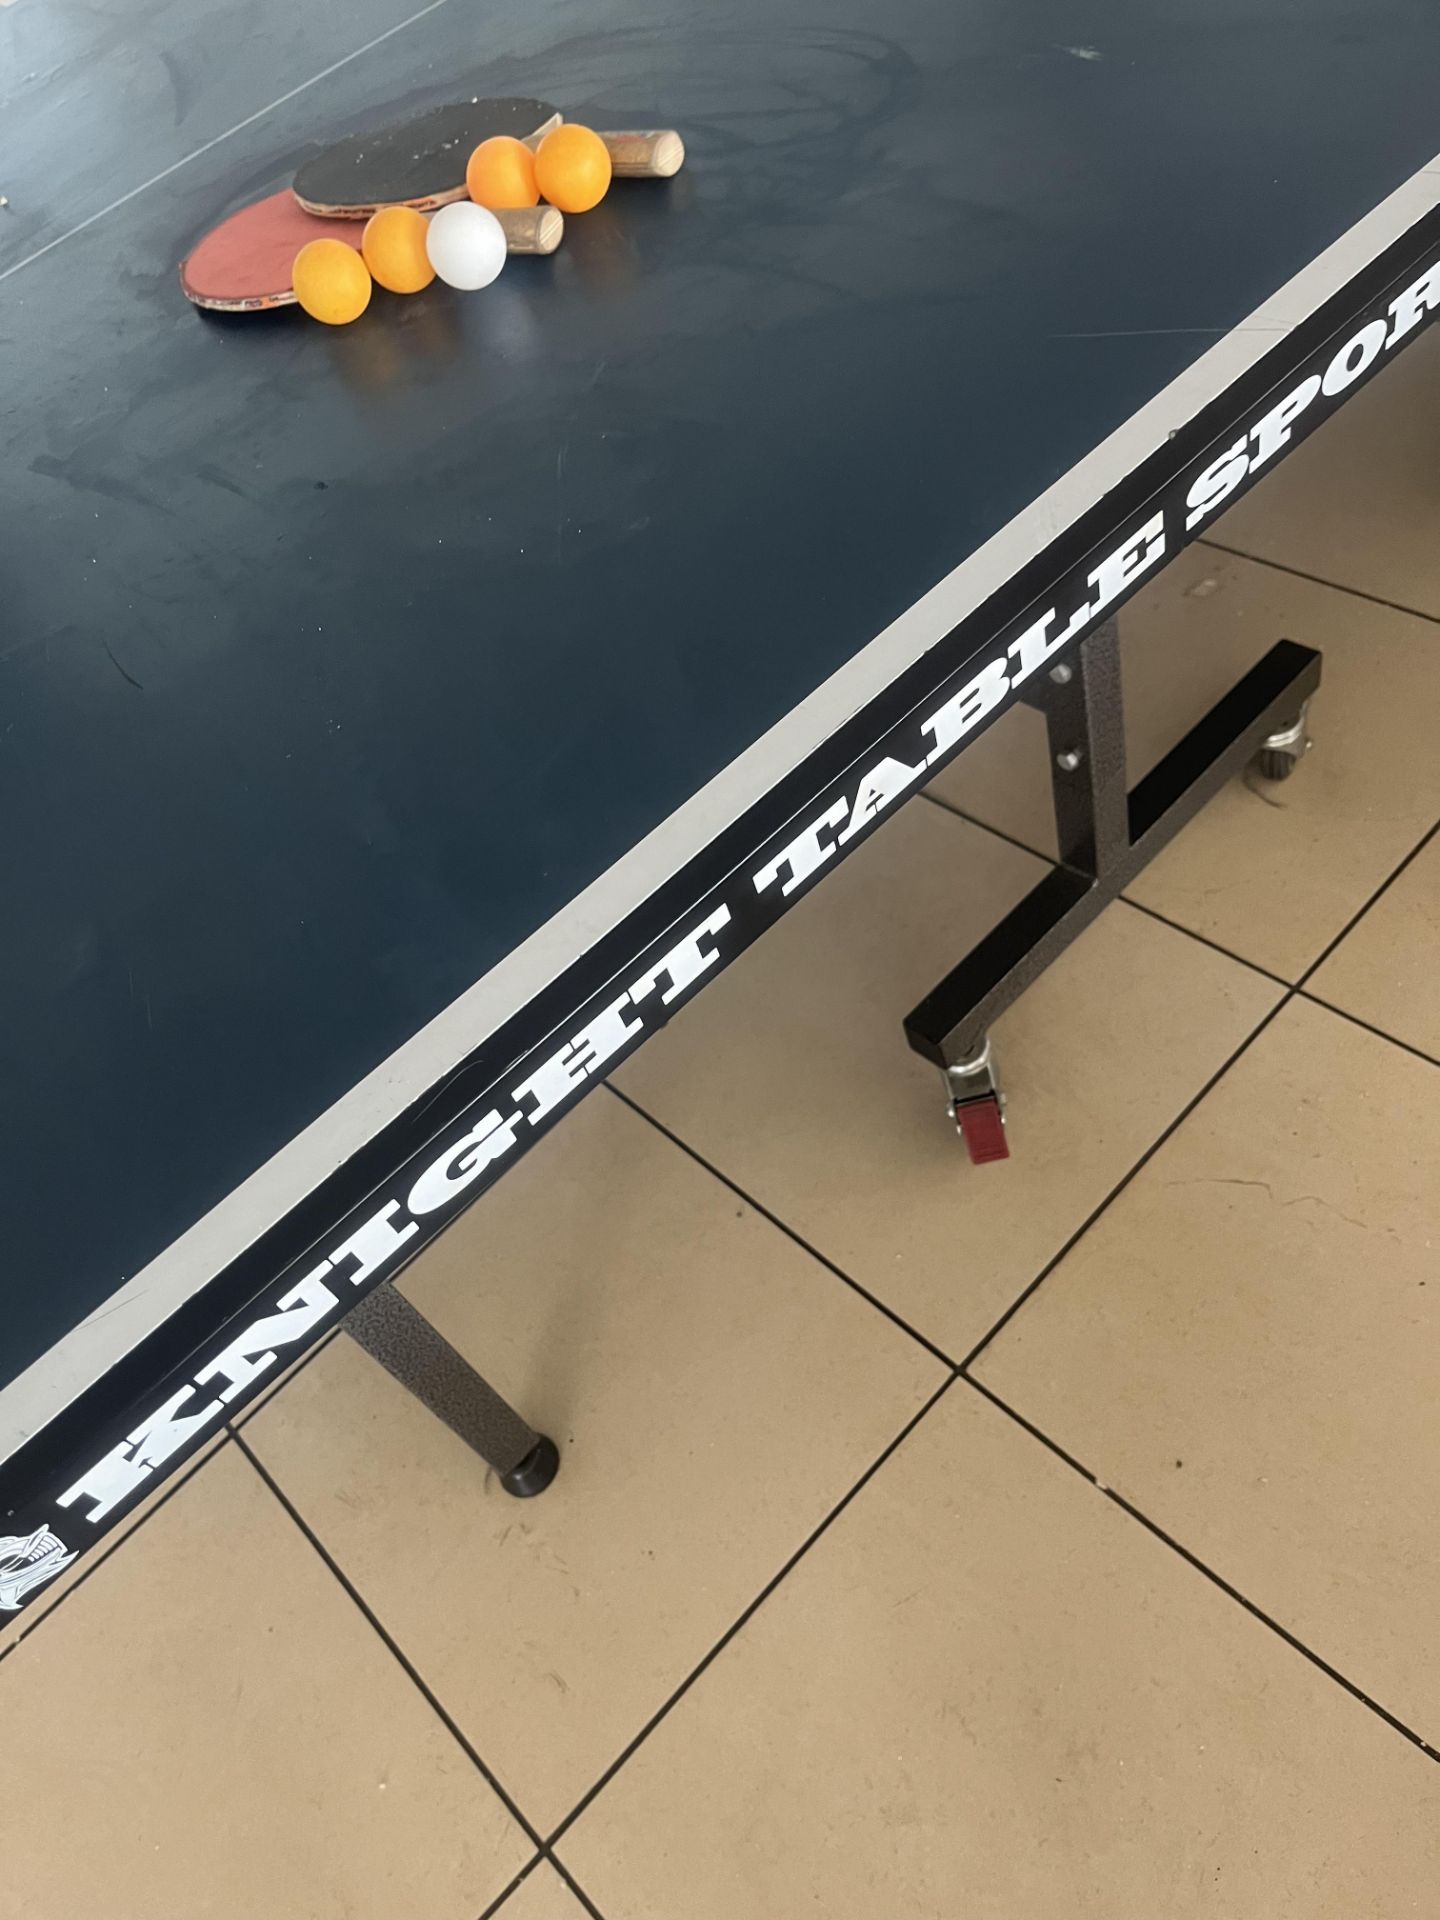 Nissan fold away table tennis table complete with two bats and four balls - Image 2 of 8